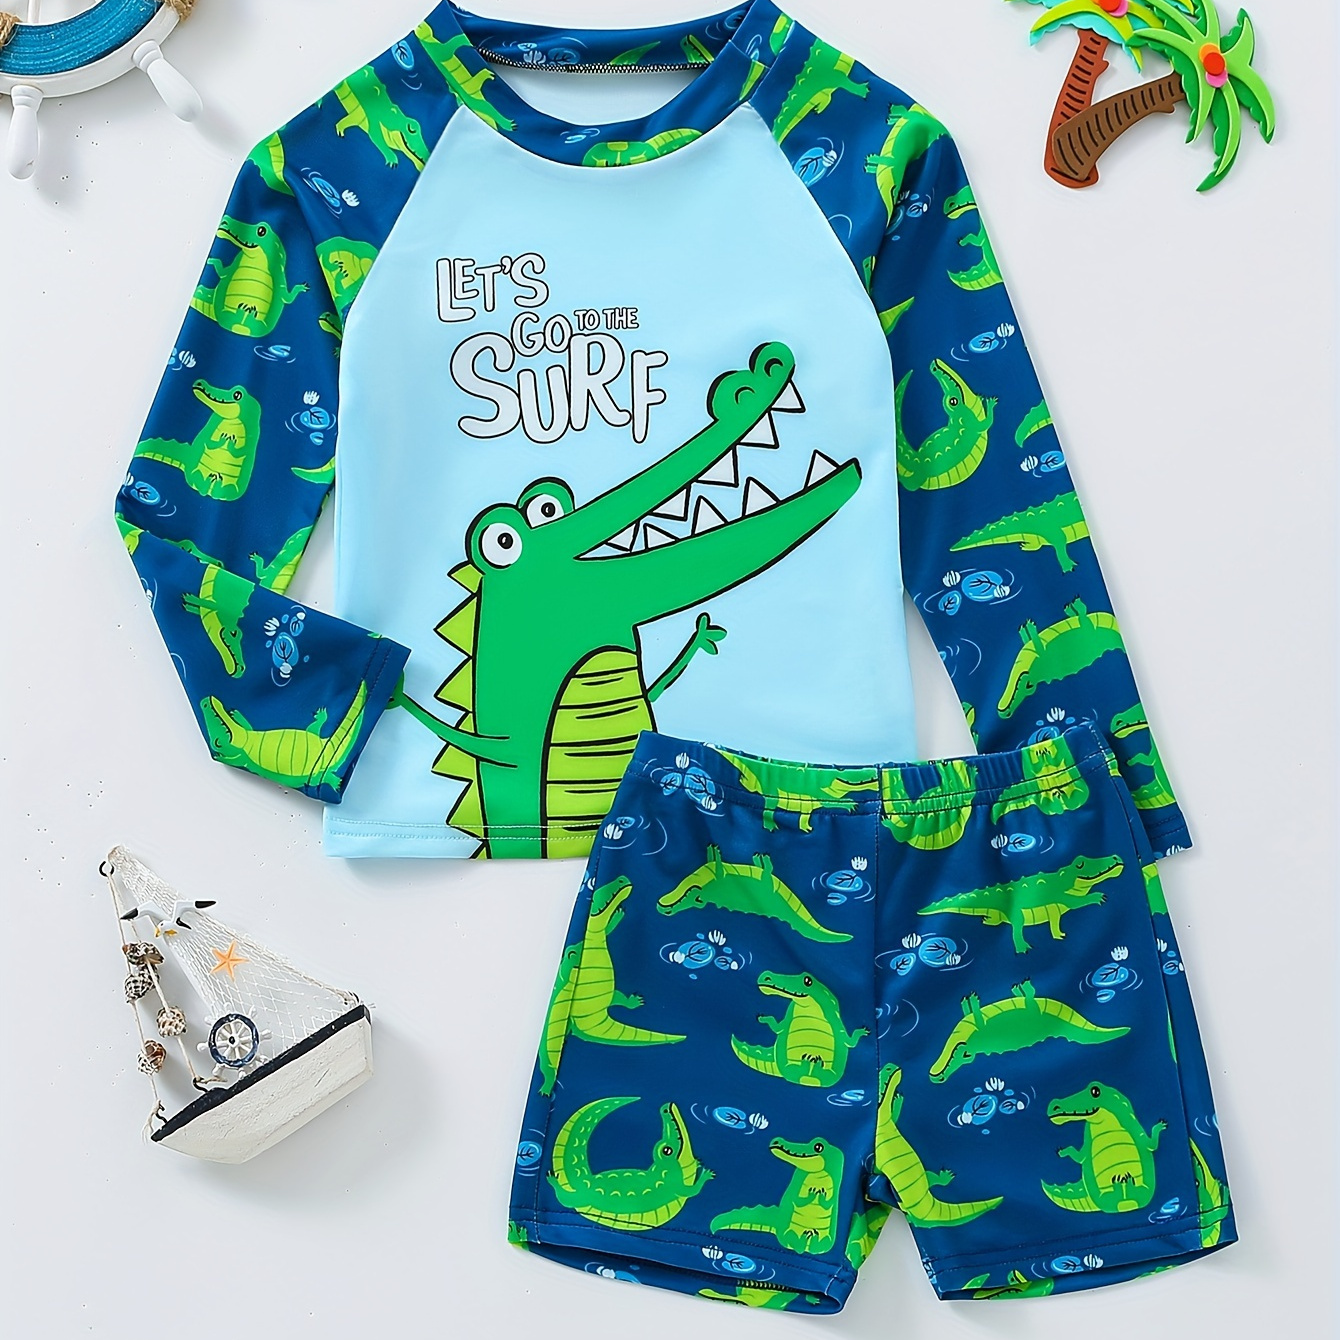 

2pcs Cute Crocodile And Surf Slogan Pattern Swimsuit For Boys, T-shirt & Swim Trunks Set, Stretchy Surfing Suit, Boys Swimwear For Summer Beach Vacation